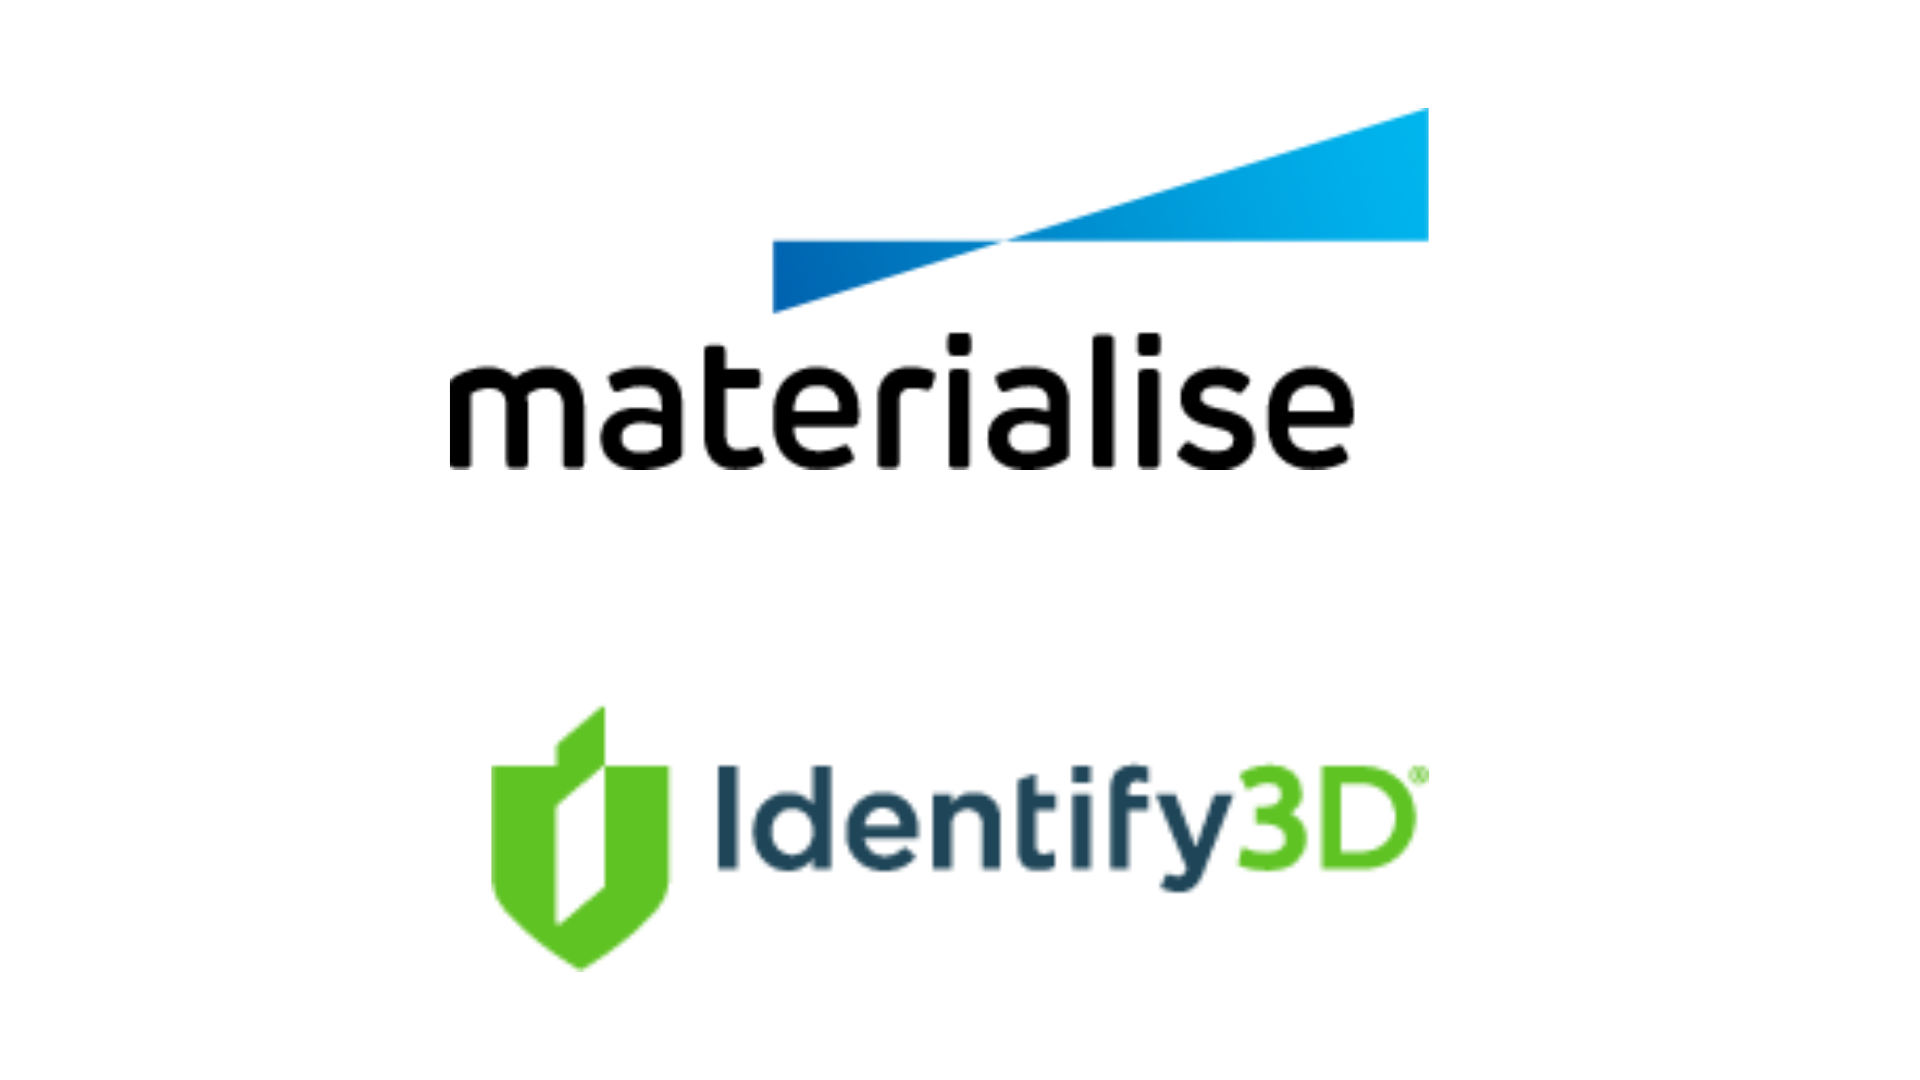 Materialise acquired Identify3D making their CO-AM platform the most secure for the transition from centralized to distributed manufacturing